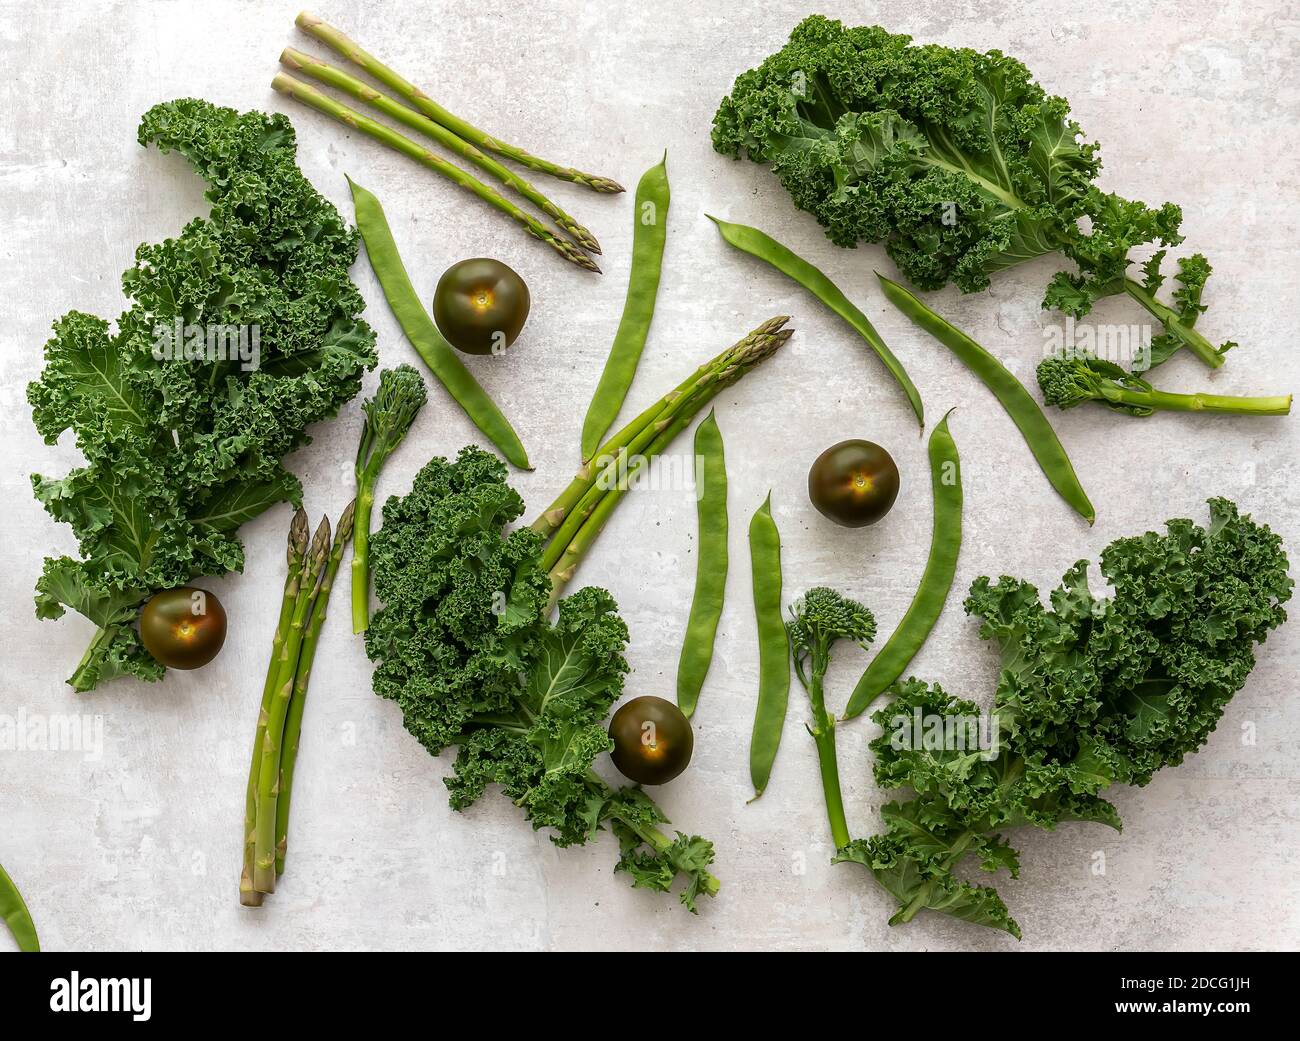 A healthy spread of fresh raw green vegetables. broccolini, kale, peas, beans, lettuce, tomatoes.  Stock Photo